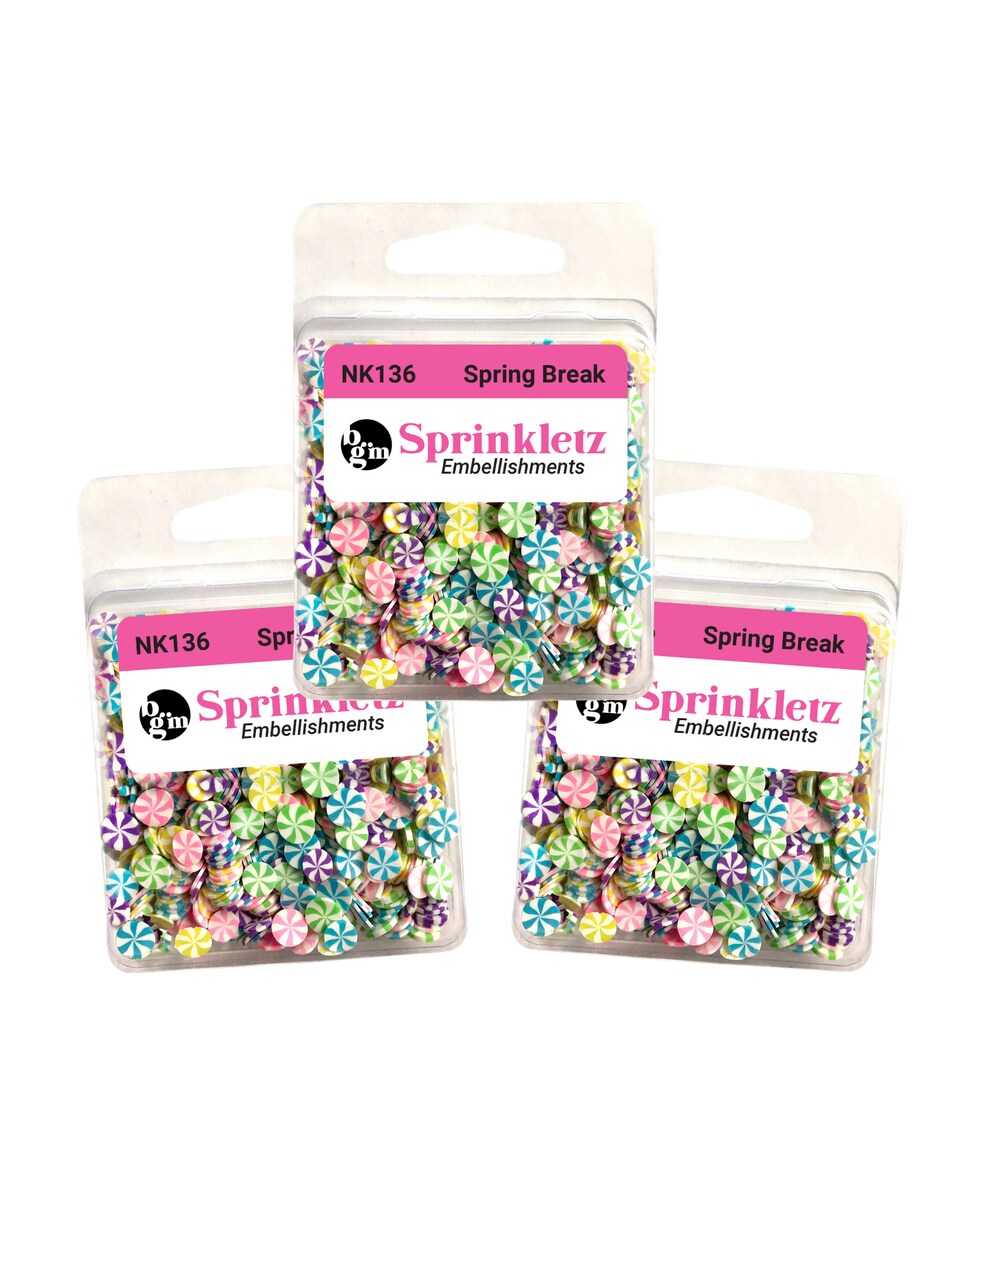 Buttons Galore Sprinkletz Embellishments for Crafts, Tiny Polymer Clay  Shapes & Unique Designs - Spring Break- 3 Pack